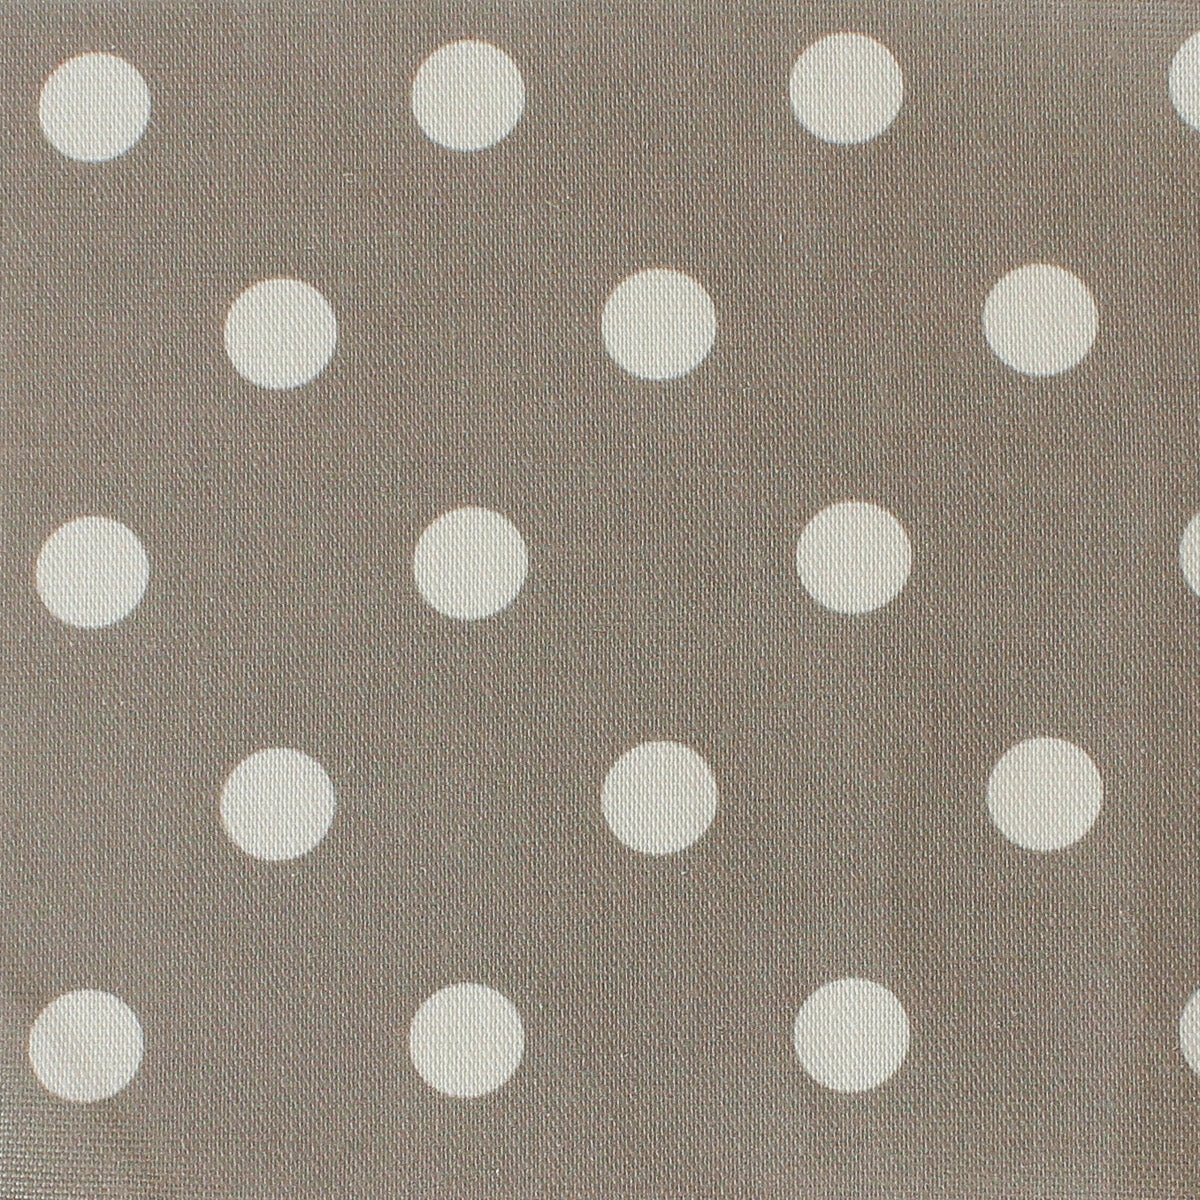 Spotty Day Reverse Fabric - Chateaux - Hydrangea Lane Home